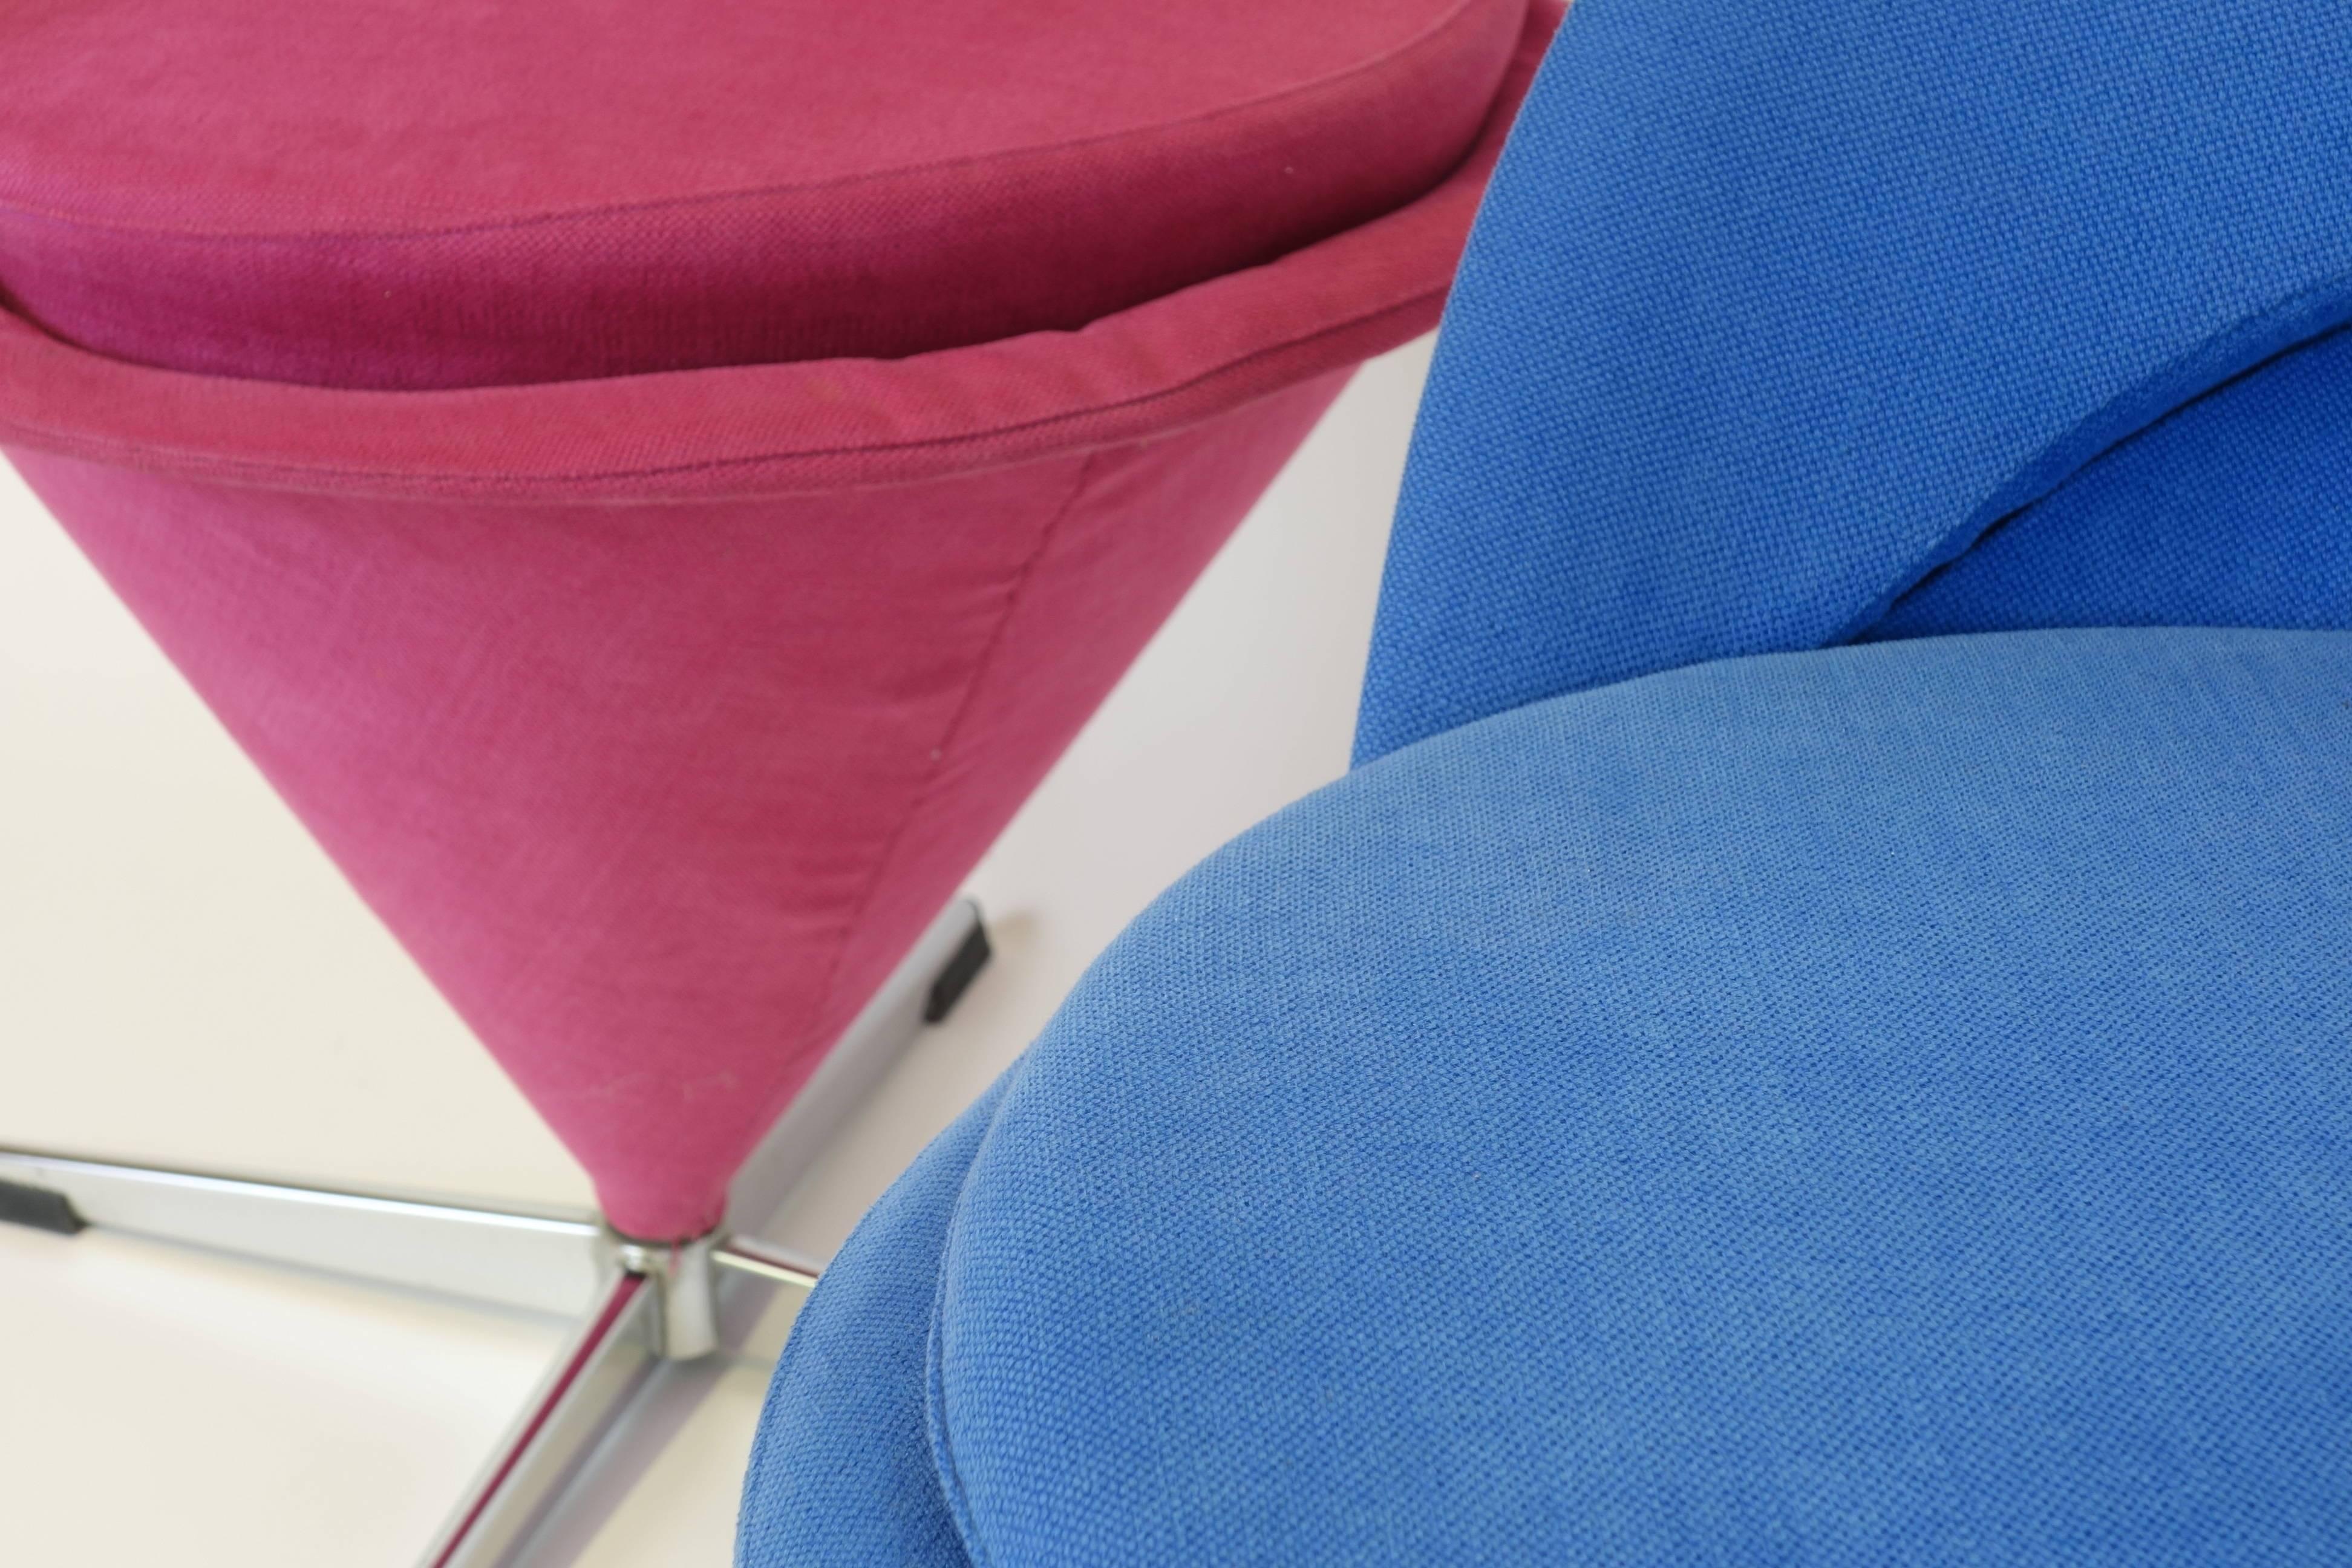 Verner Panton Design Pair of Cone Chairs Vitra Blue Red Denmark Original Nehl In Excellent Condition For Sale In Perchtoldsdorf, AT